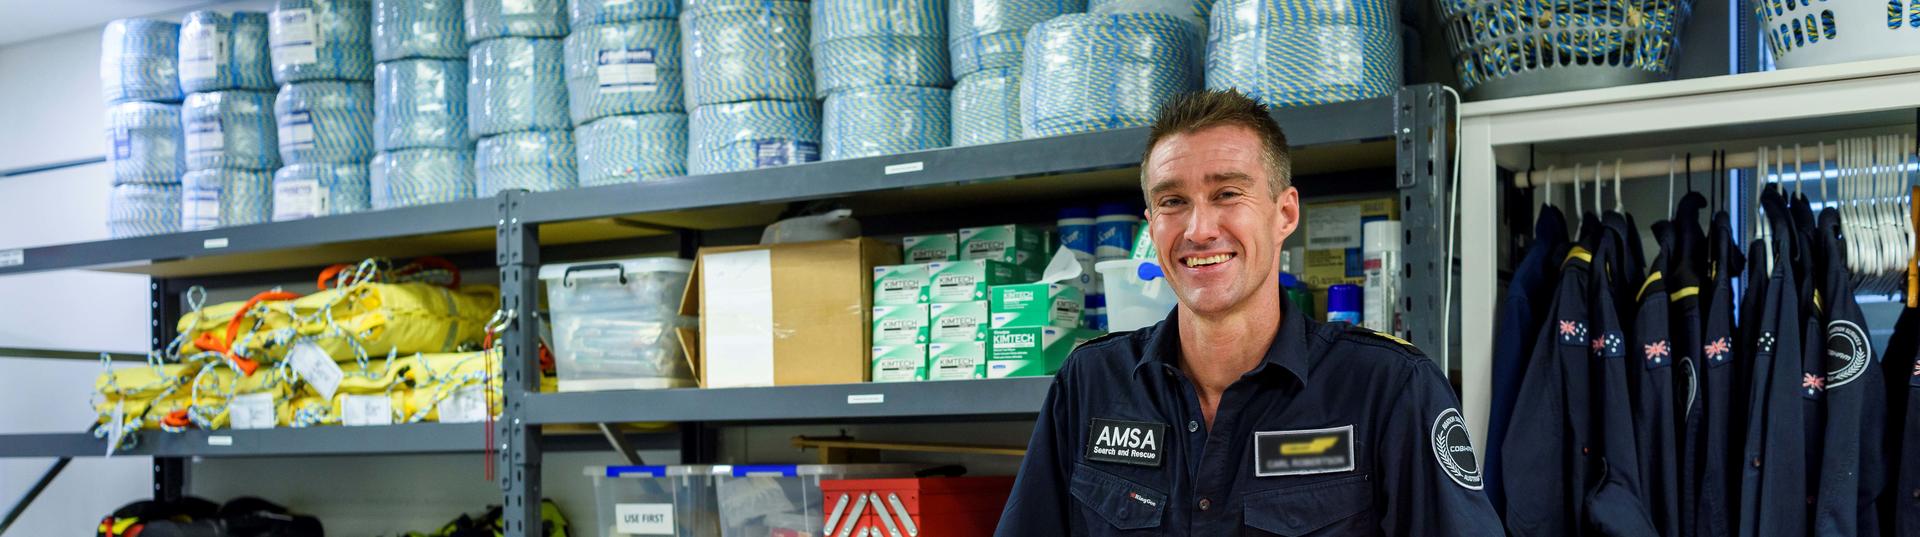 Man standing in supply room smiling